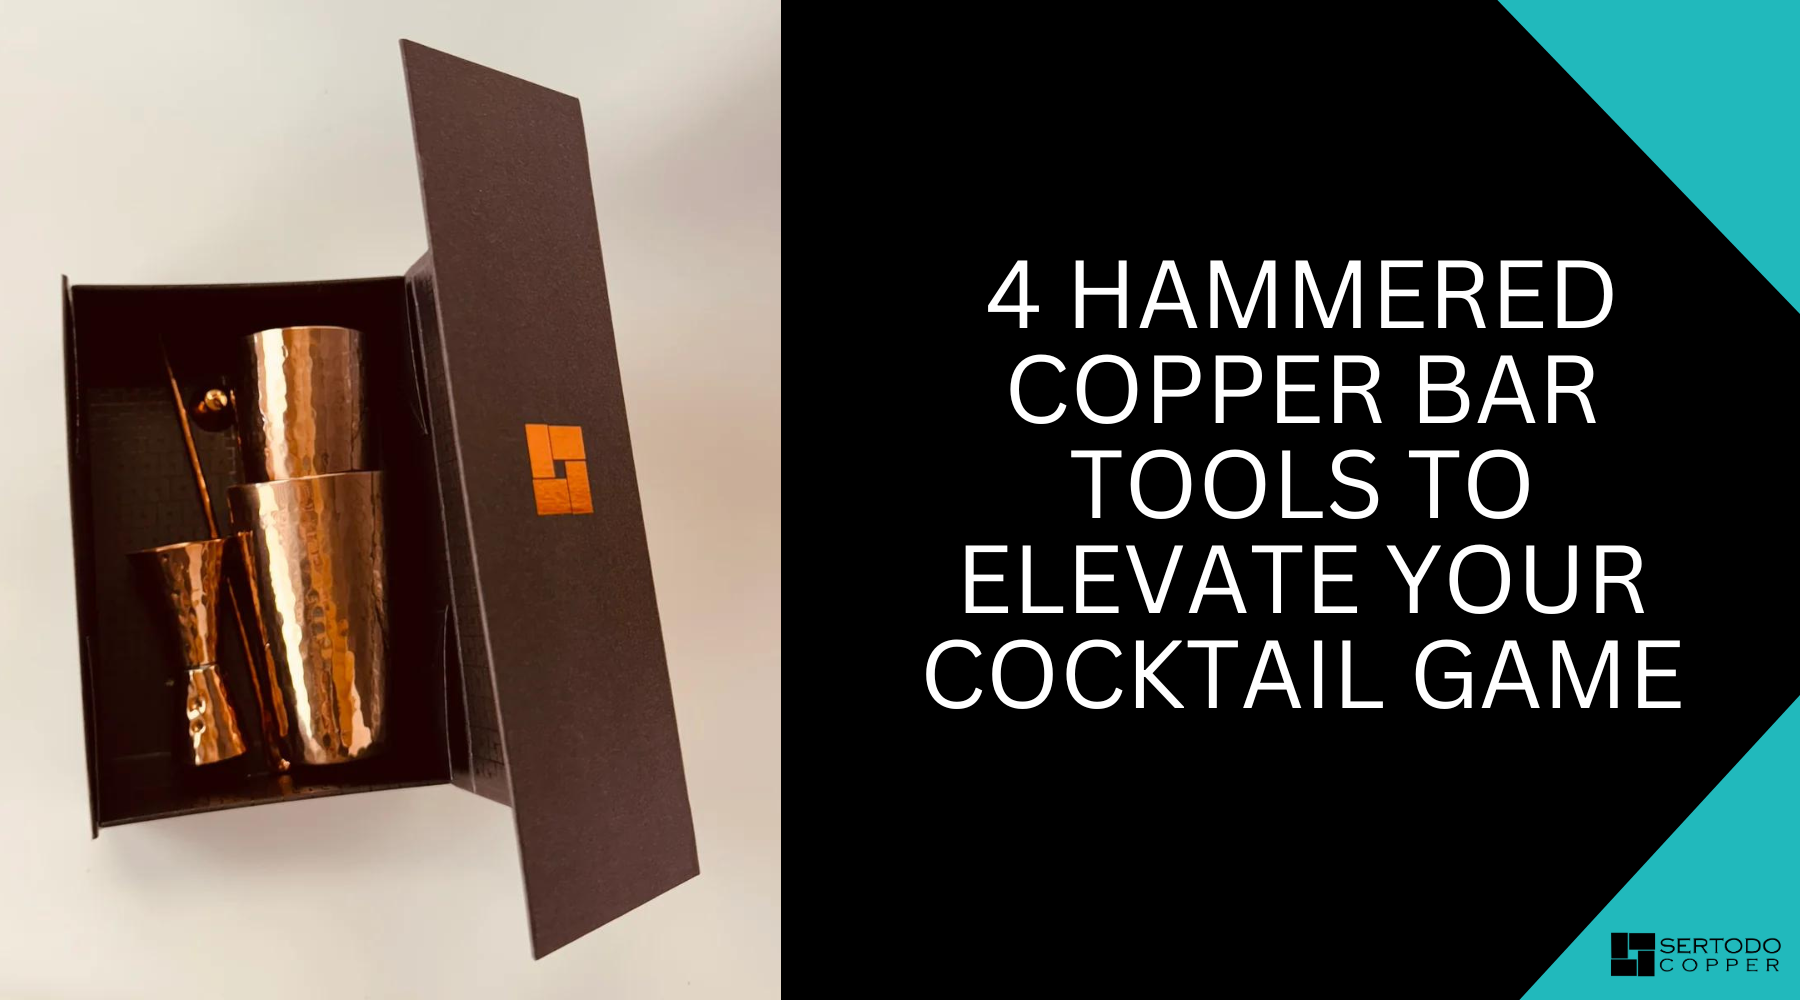 Hammered copper bar tools to elevate your cocktail game